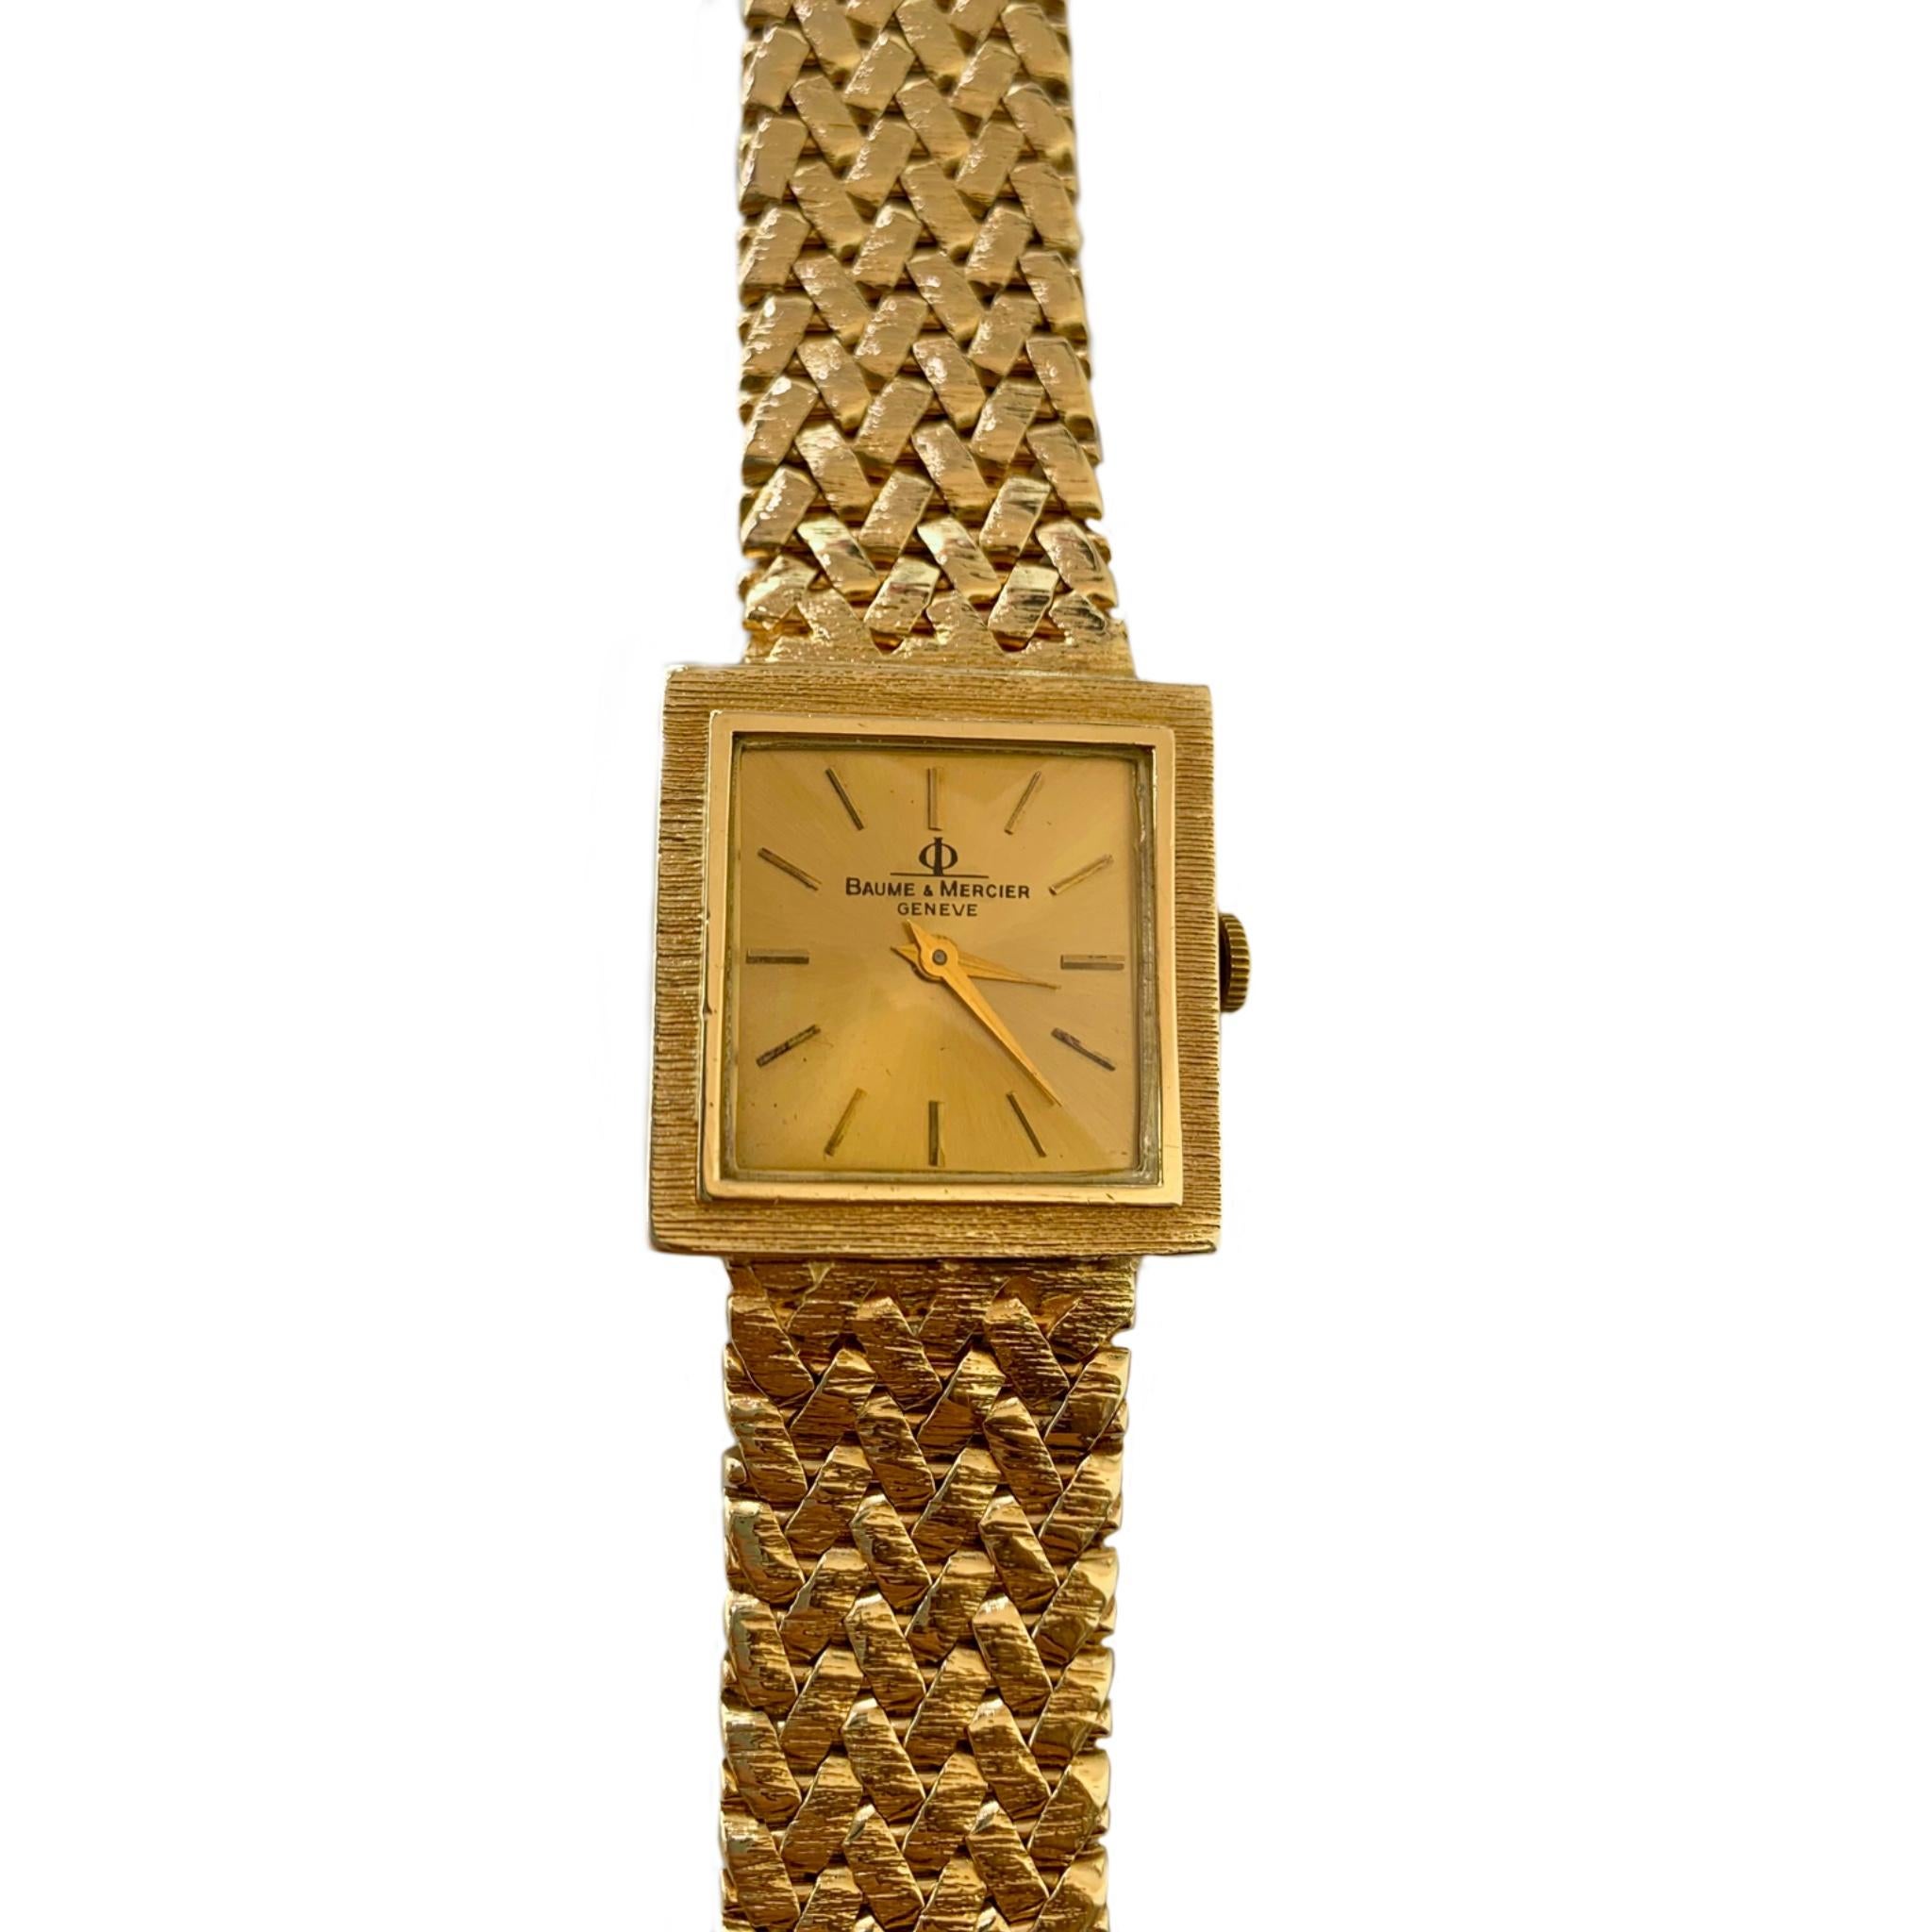 Vintage Baume & Mercier 14 karat yellow gold wrist watch circa 1960's. The rare square shaped case of 25mm contains the original 17 jewel Swiss movement. The flexible and comfortable linked band is 15.5mm wide, 7